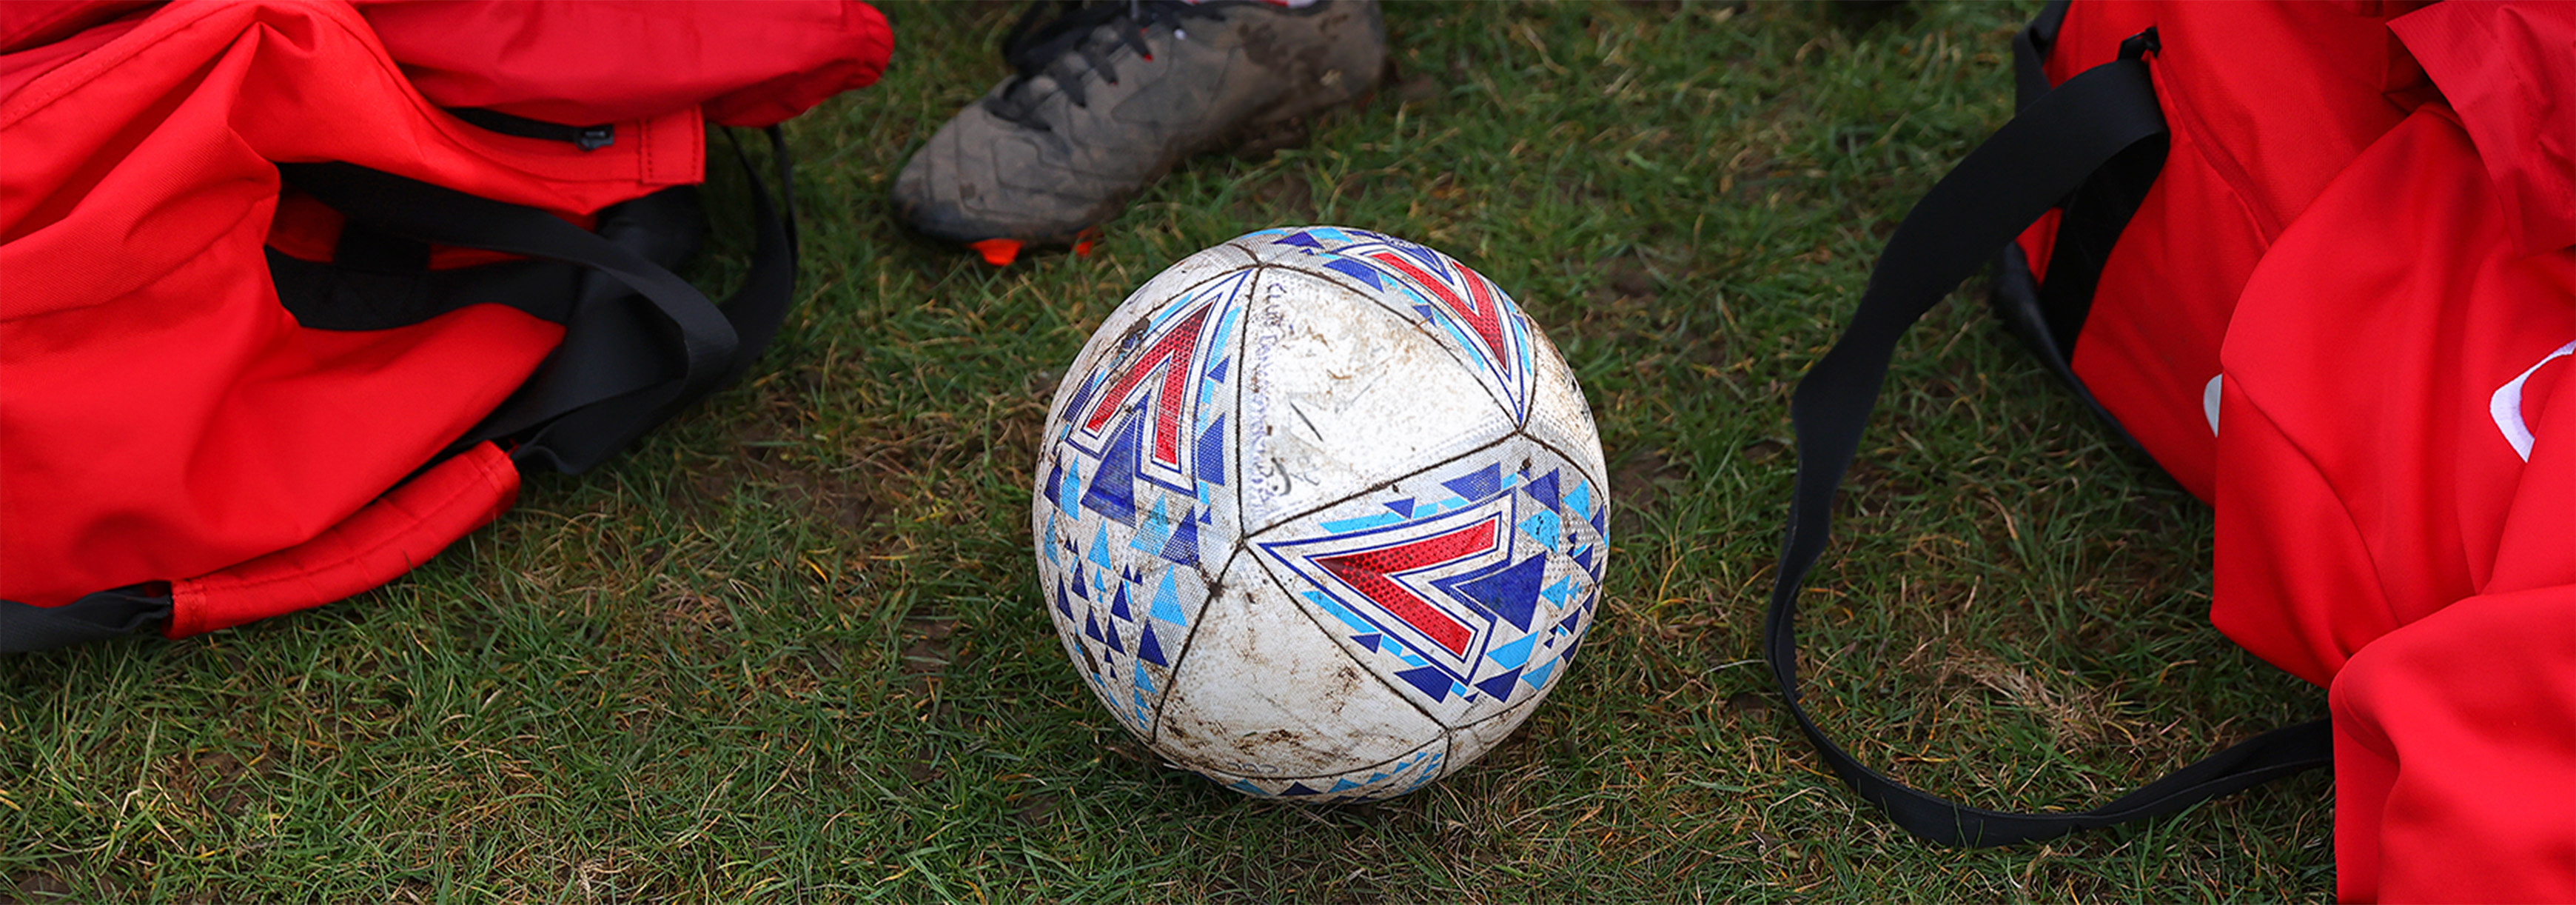 A football placed on a grass pitch.